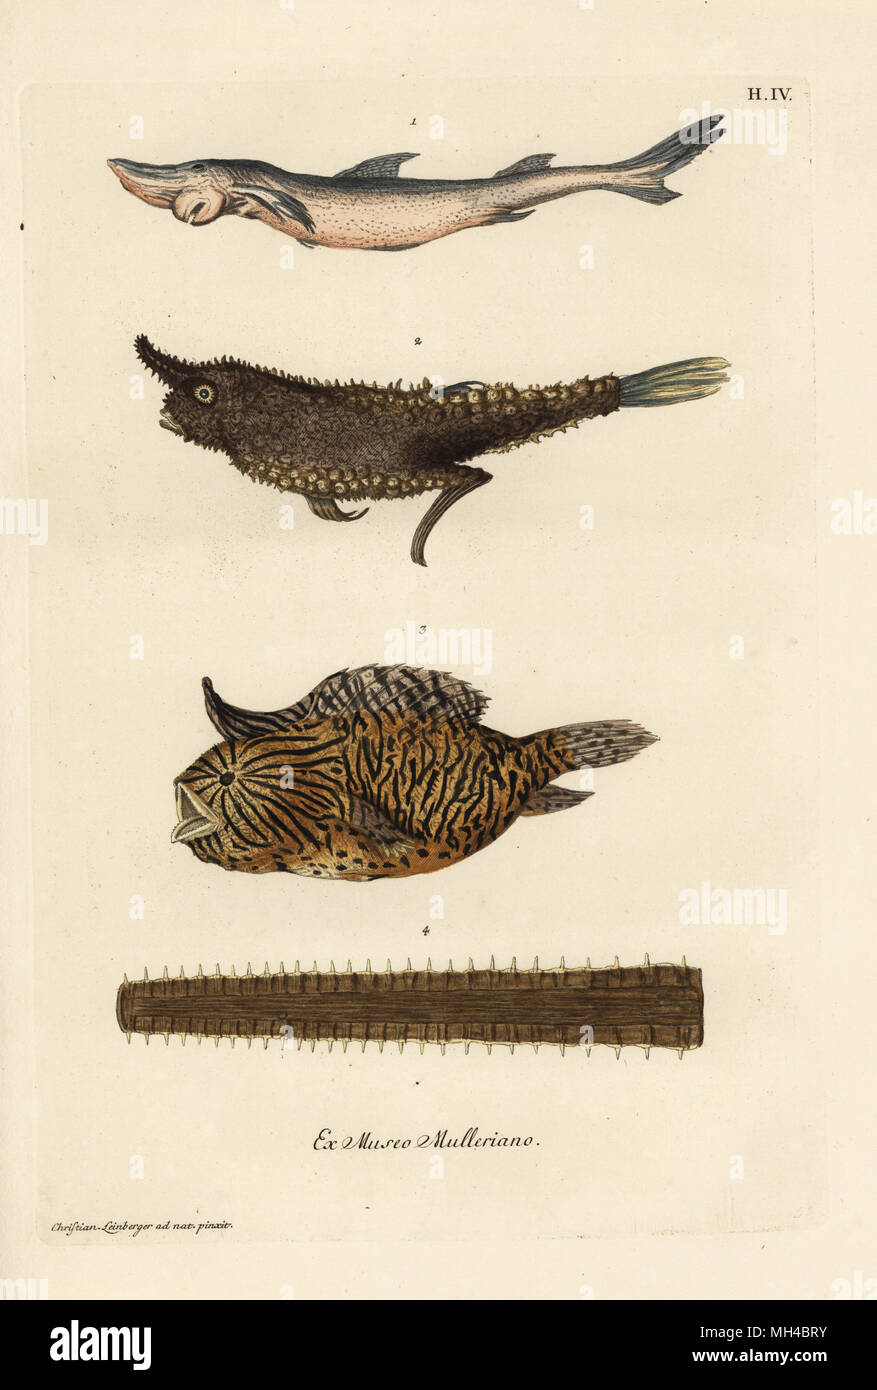 Common smoothhand, Mustelus mustelus, Vulnerable 1, angler fish, Lophius piscatorius 2, burrfish, Chilomycterus schoepfi 3, and bill of a sawfish, Pristis pectinata, critically endangered 4. Un petit haay ou requin, Mustelus laevis, le petit diable marin, Rana piscatrix, un petit poisson rapace des Iles Antilles, la scie ou la corne dentee d'un espadon, Pristis. Handcoloured copperplate engraving after an illustration by Christian Leinberger from Georg Wolfgang Knorr's Deliciae Naturae Selectae of Kabinet van Zeldzaamheden der Natuur, Blusse and Son, Nuremberg, 1771. Specimens from a Wunderkam Stock Photo